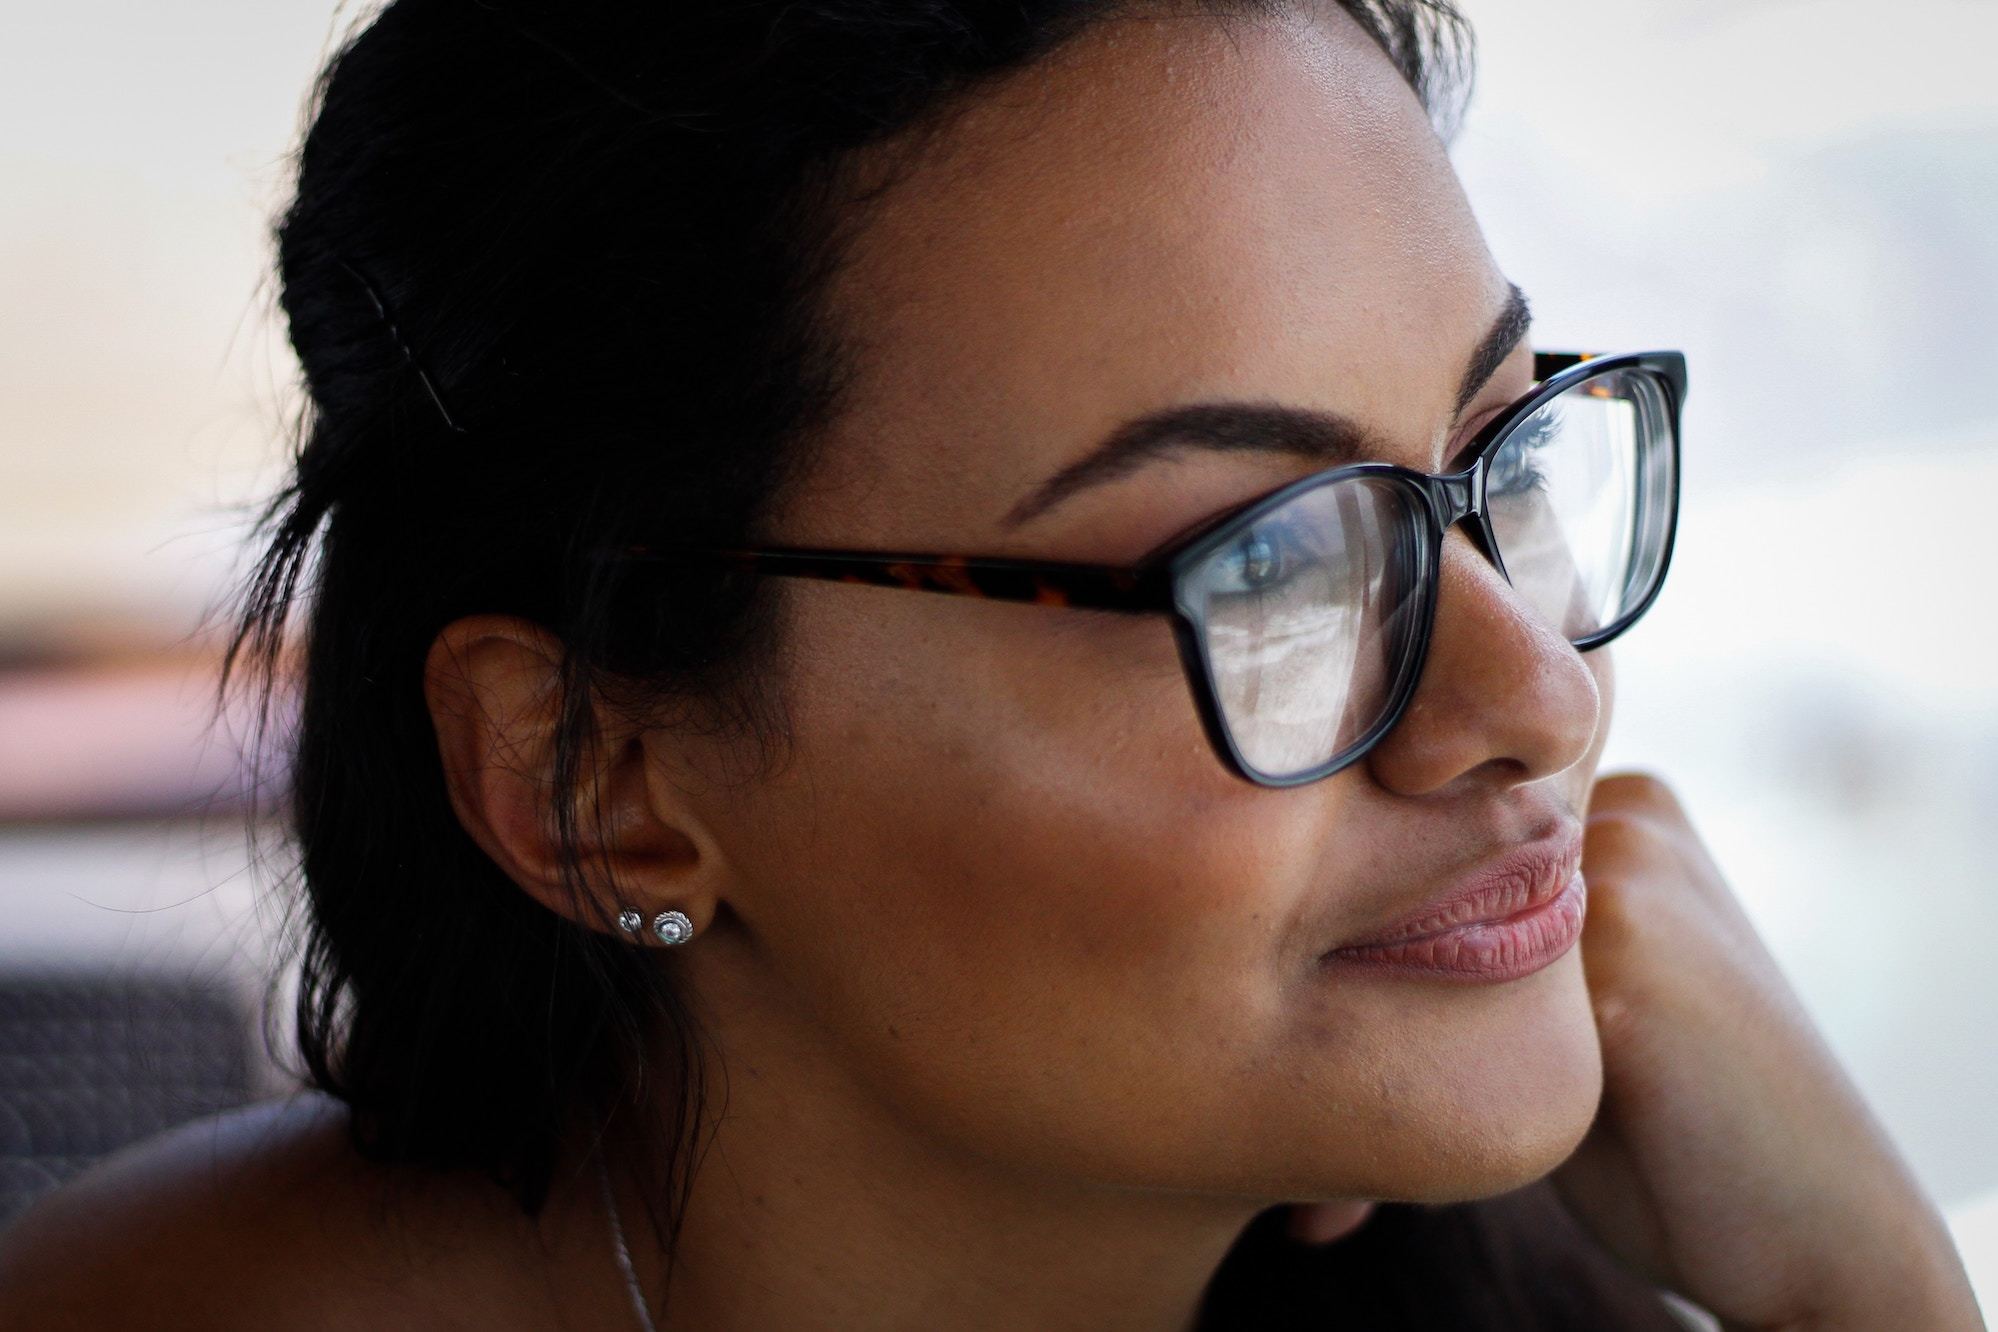 Young woman wearing glasses looks pensive